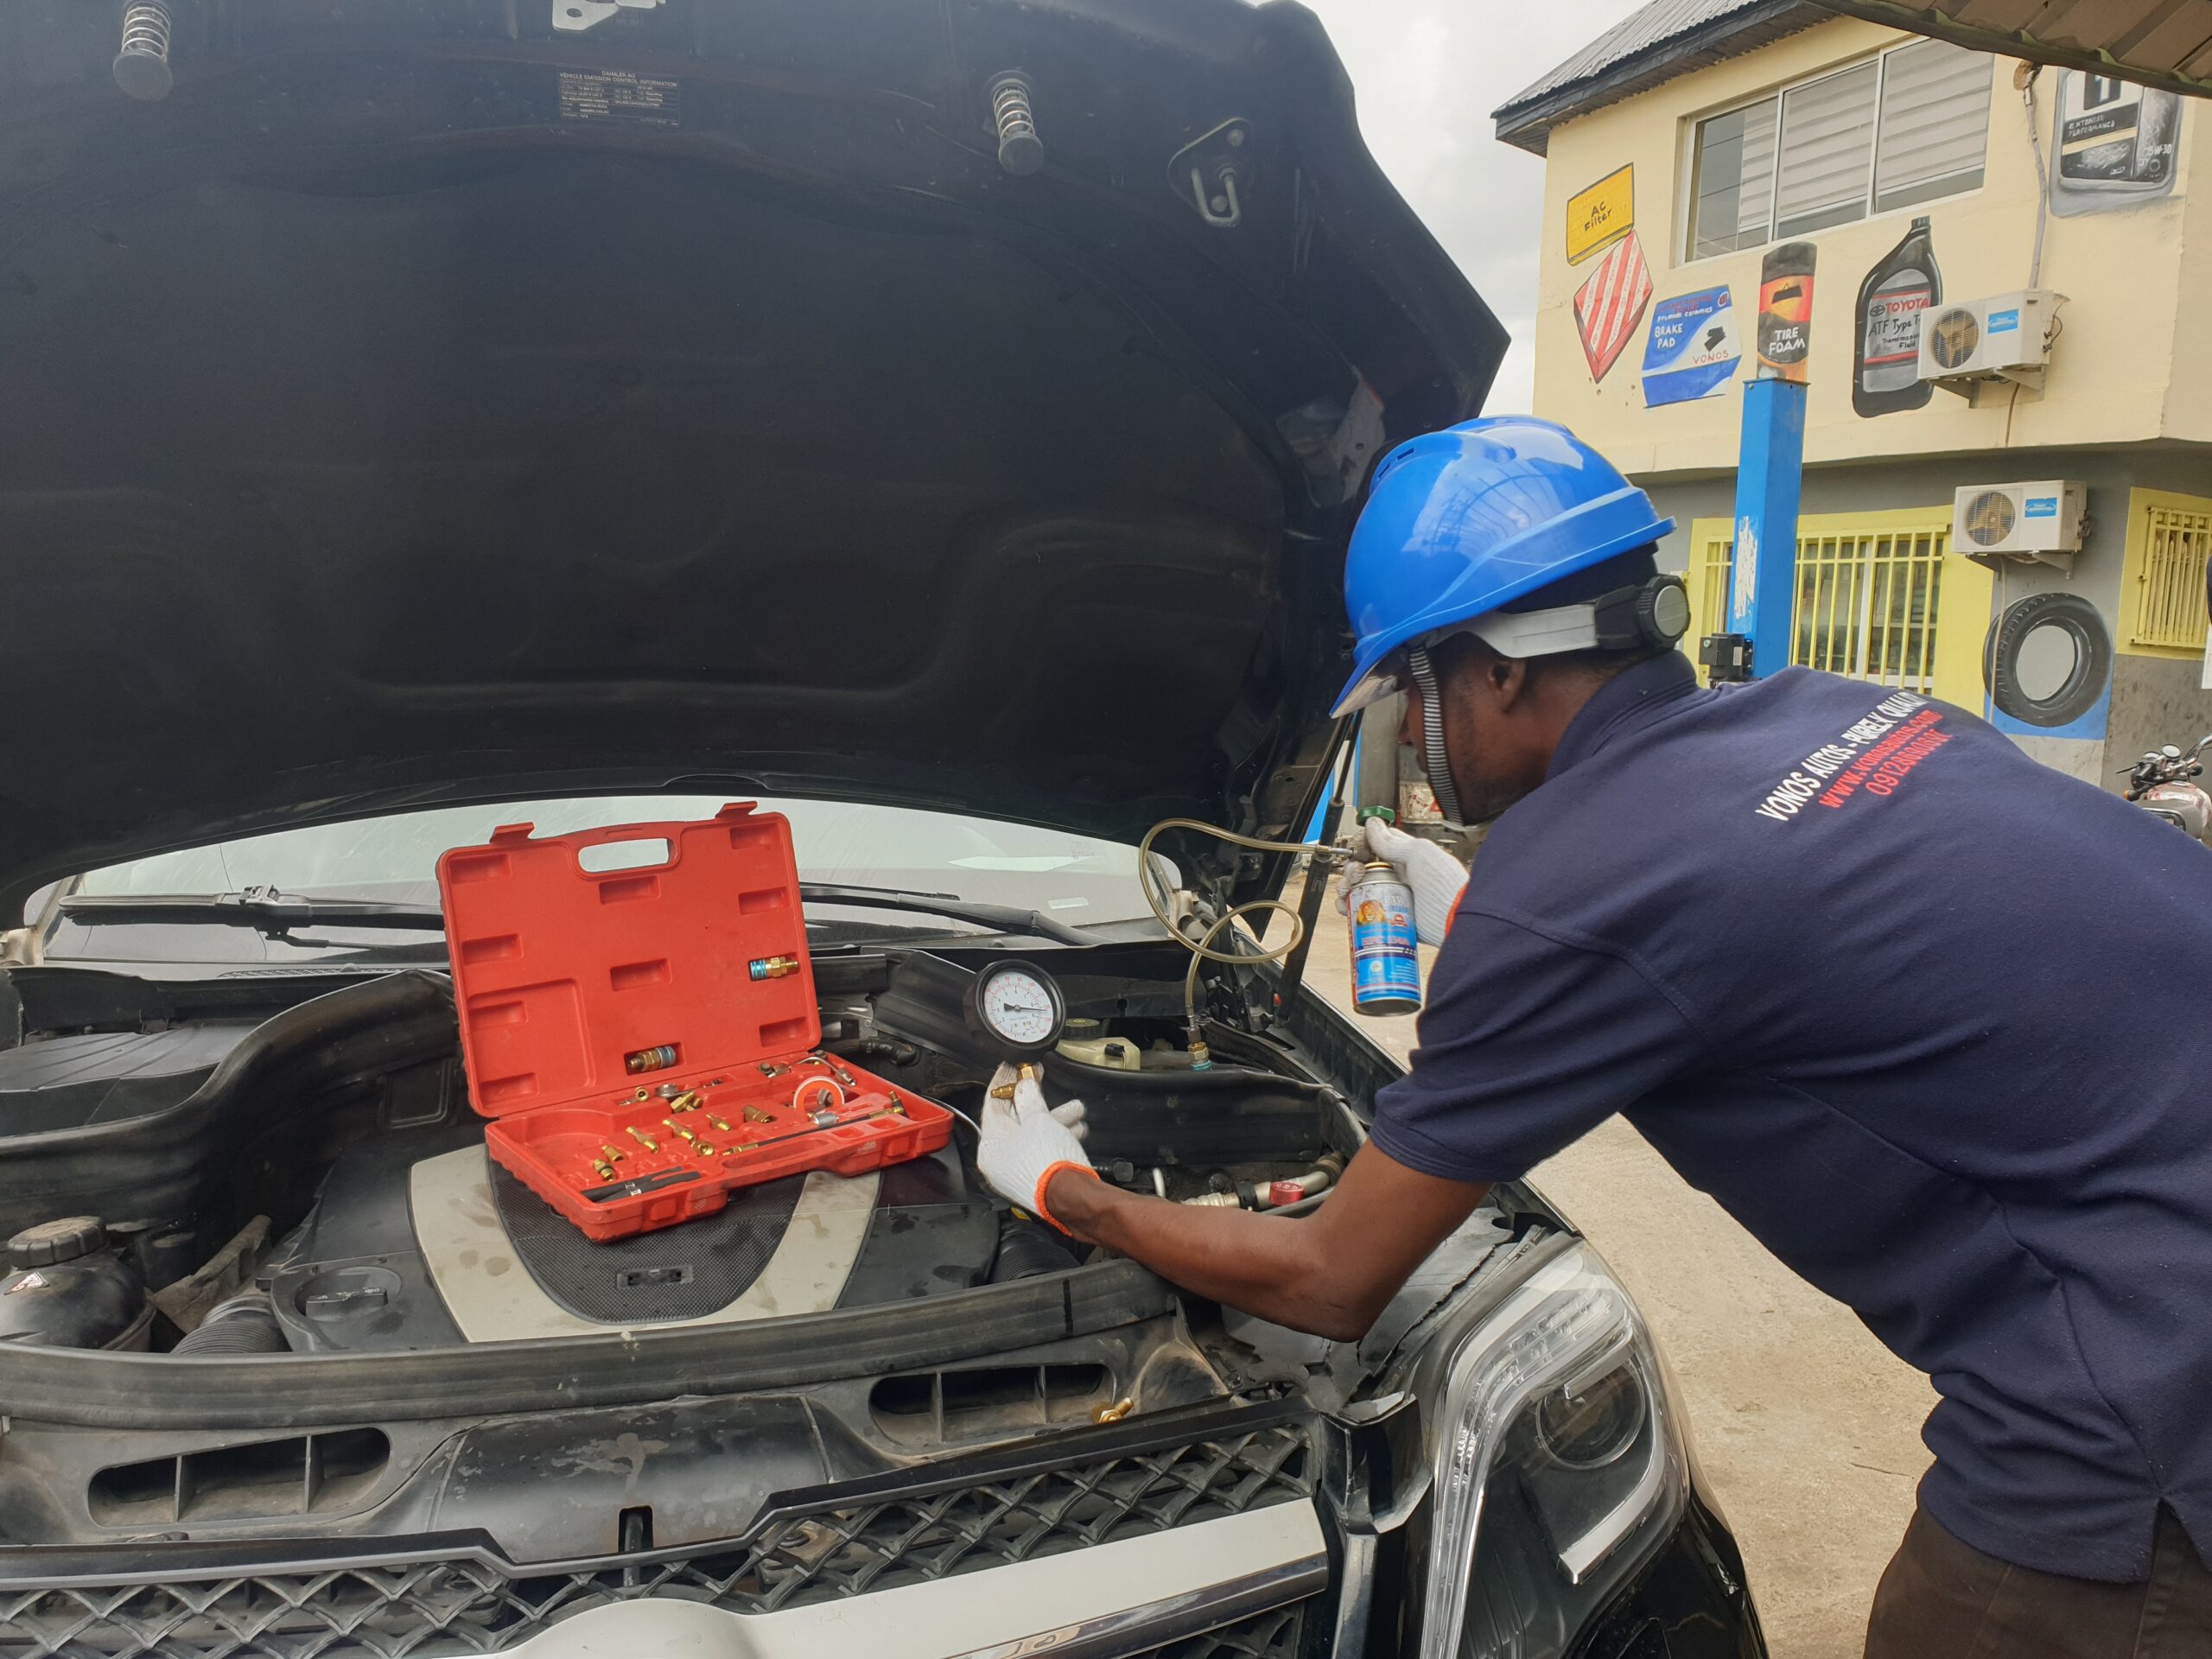 A technician performing an air conditioning refrigerant refill on a car. The technician is connecting a hose to the car's AC system to replenish refrigerant, addressing a common car AC problem and providing a solution for improved cooling performance.